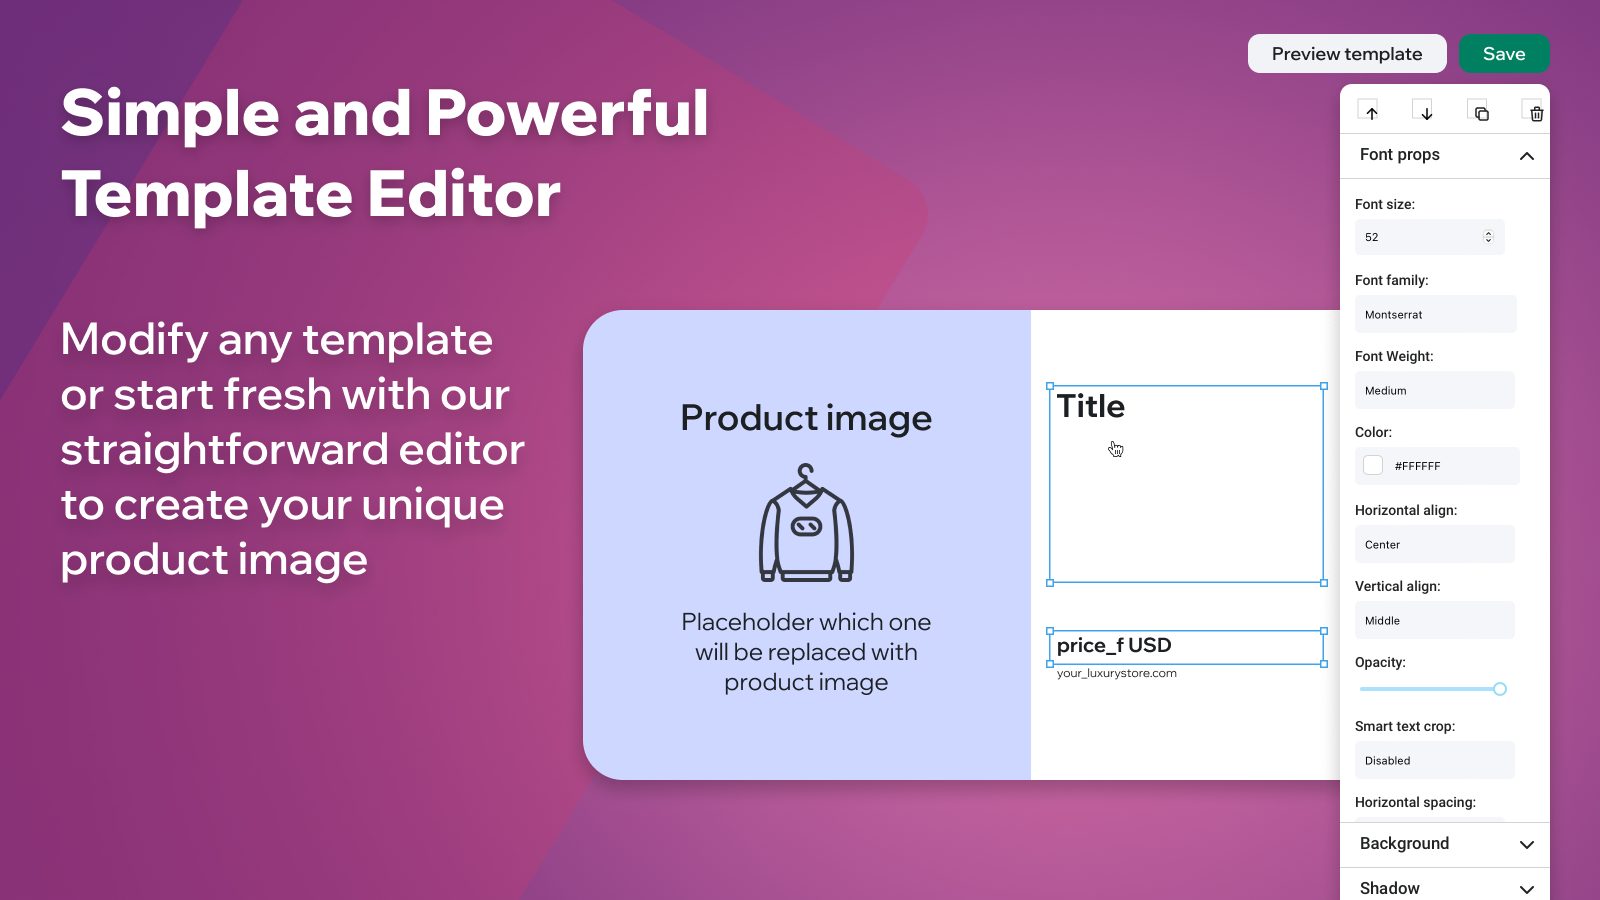 Simple and Powerful Template Editor